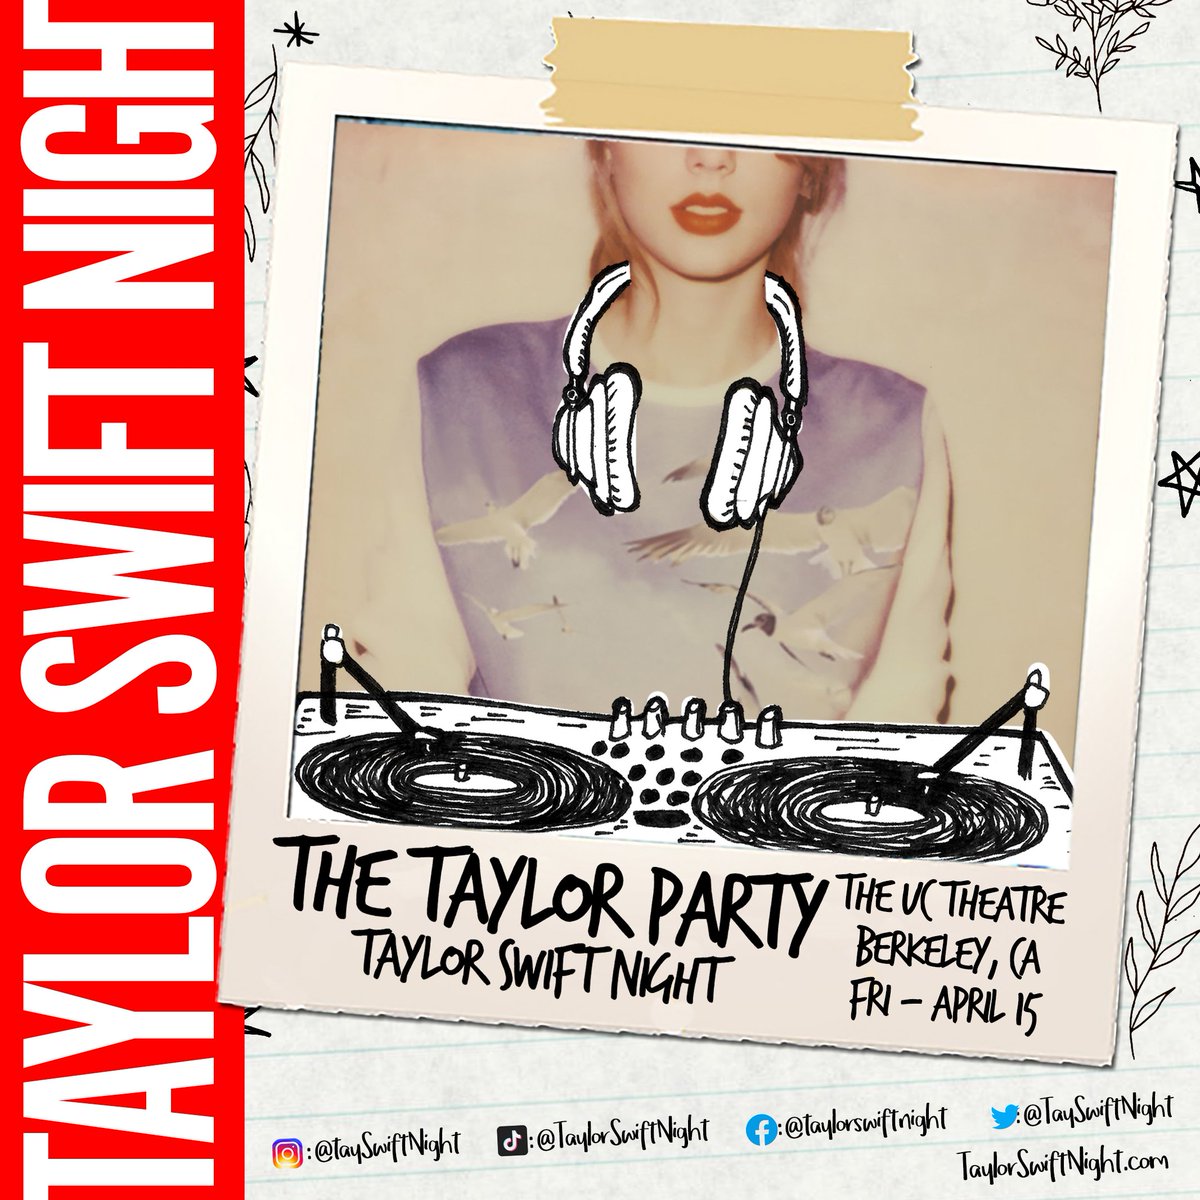 Just announced! 💋 THE TAYLOR PARTY: TAYLOR SWIFT NIGHT 💃 is coming to Berkeley on Friday, April 15. Calling all Swifties! Grab your crown and crew and come dance the night away to non-stop Taylor. 💃 Are you ready for it?? #thetaylorparty 🎈On Sale: Friday, March 11 @ 10AM